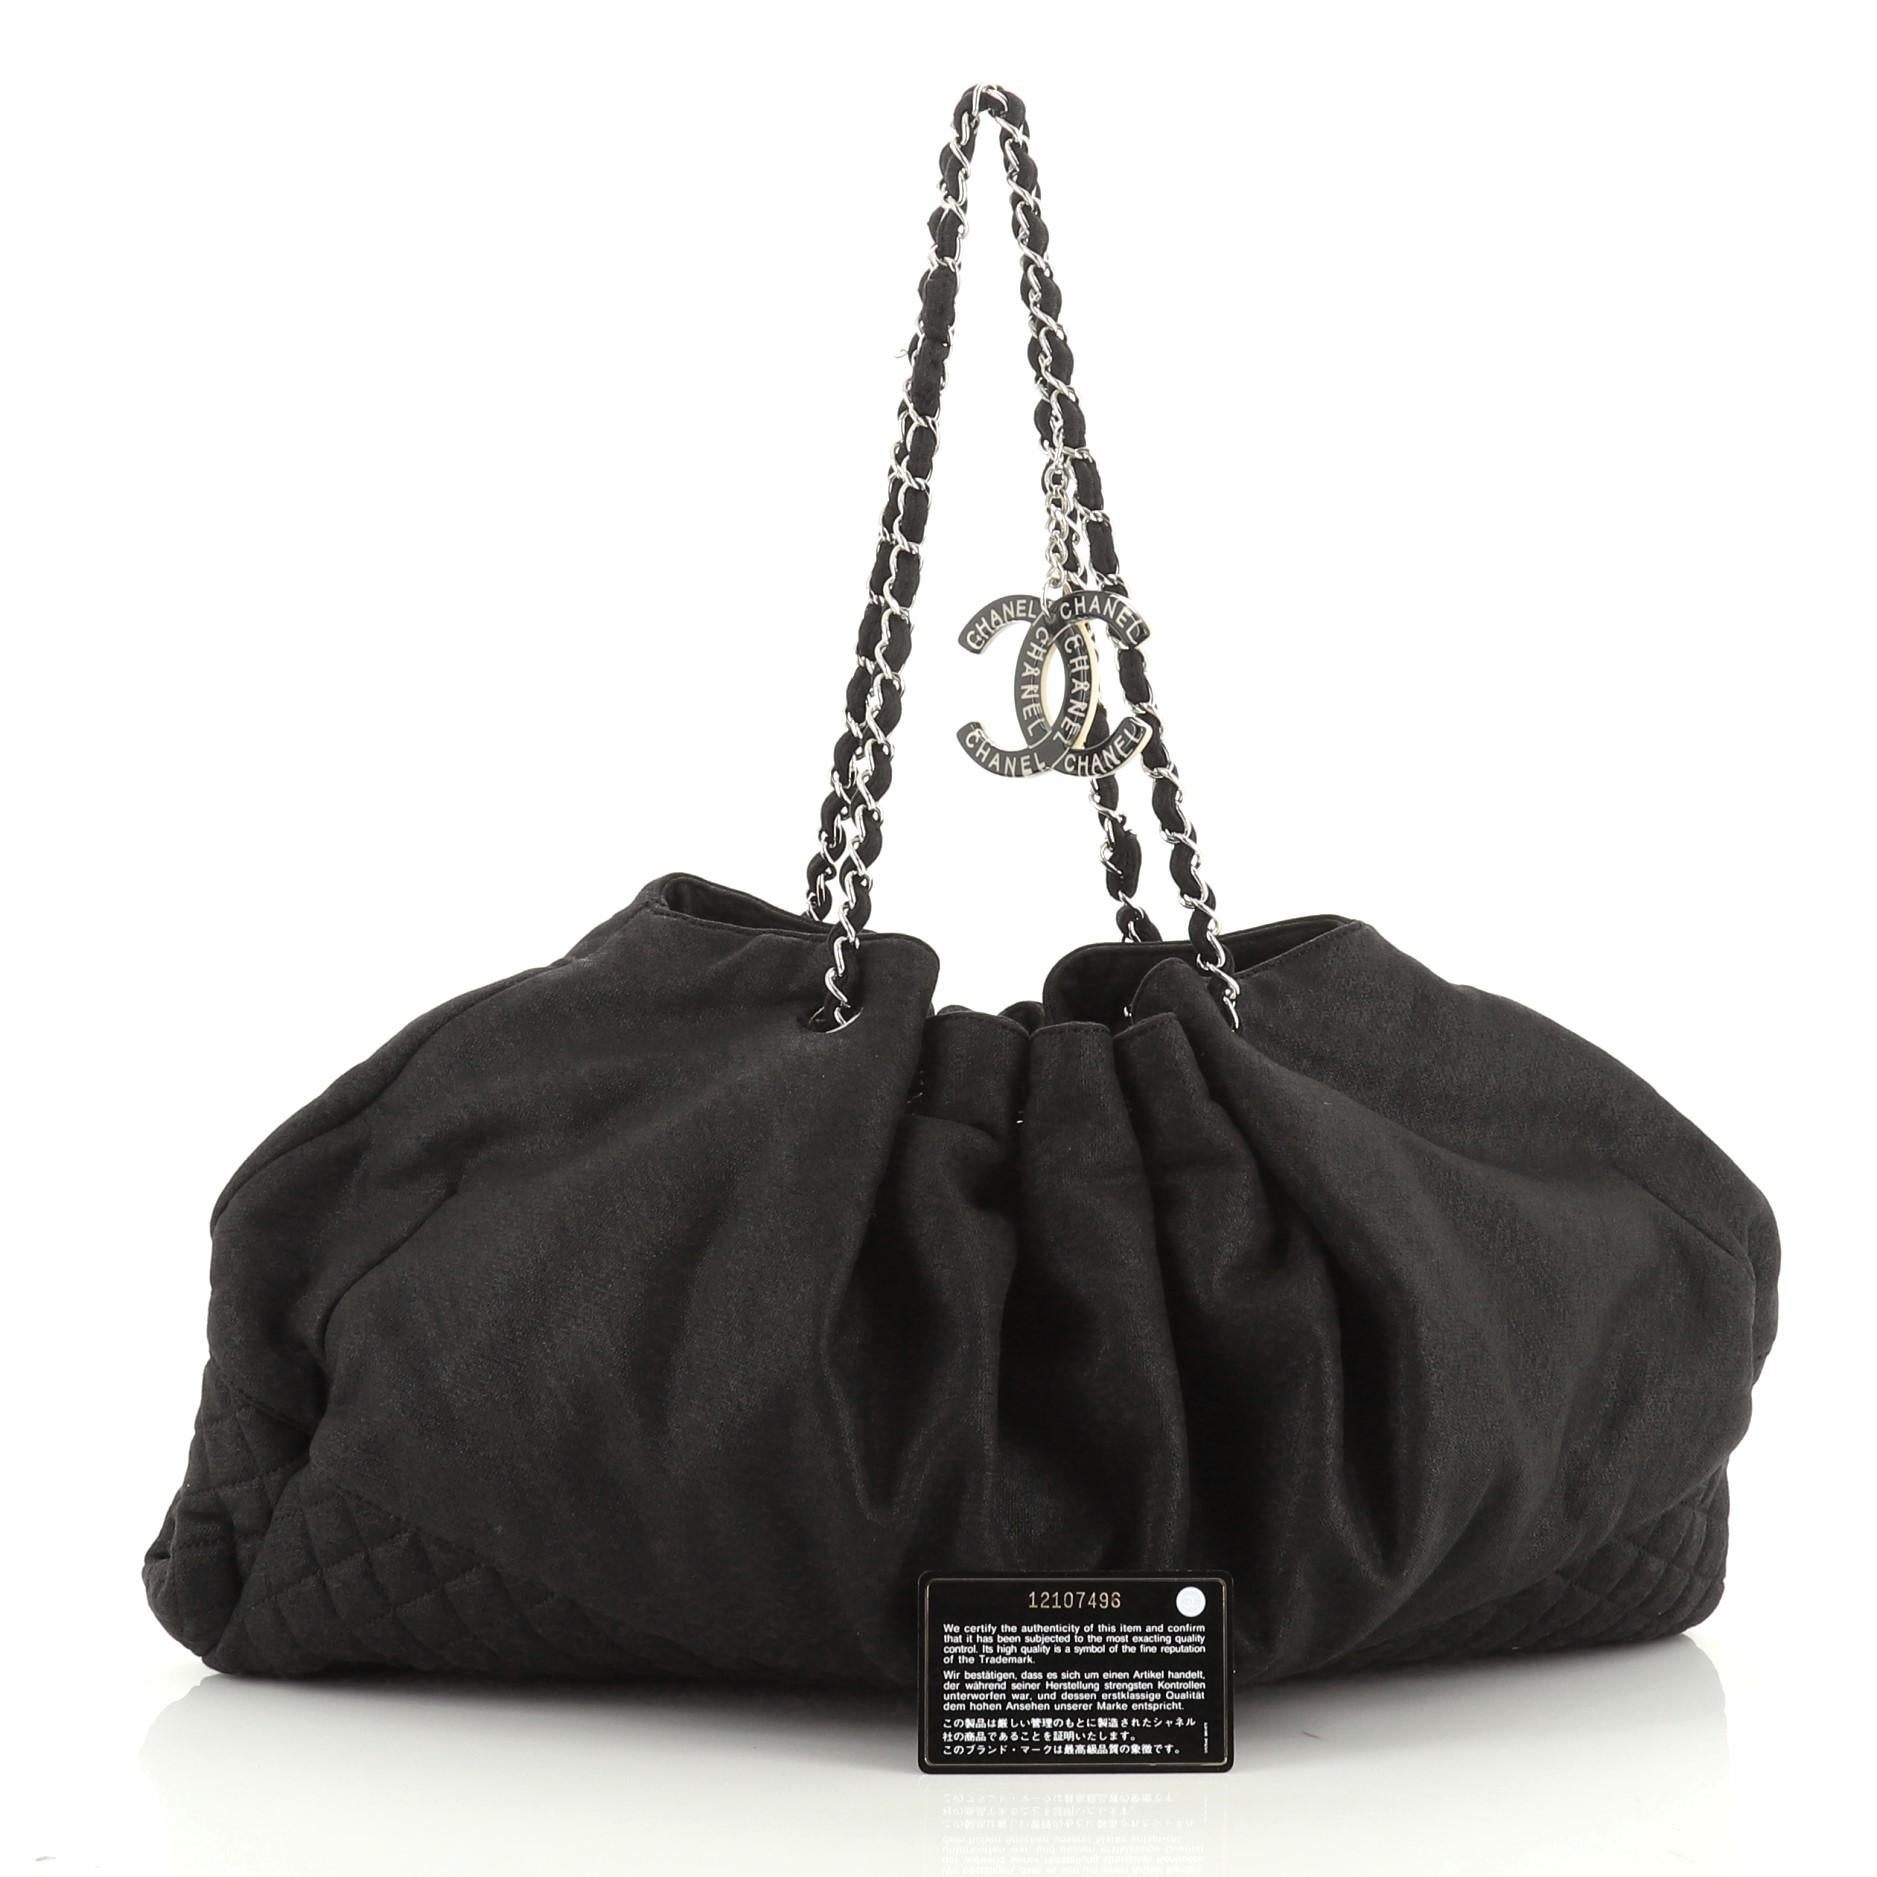 This Chanel Melrose Cabas Tote Jersey Medium, crafted from black jersey, features quilted diamond base, woven-in leather chain strap, and silver-tone hardware. Its drawstring closure opens to a gray silk interior with slip pockets. Hologram sticker